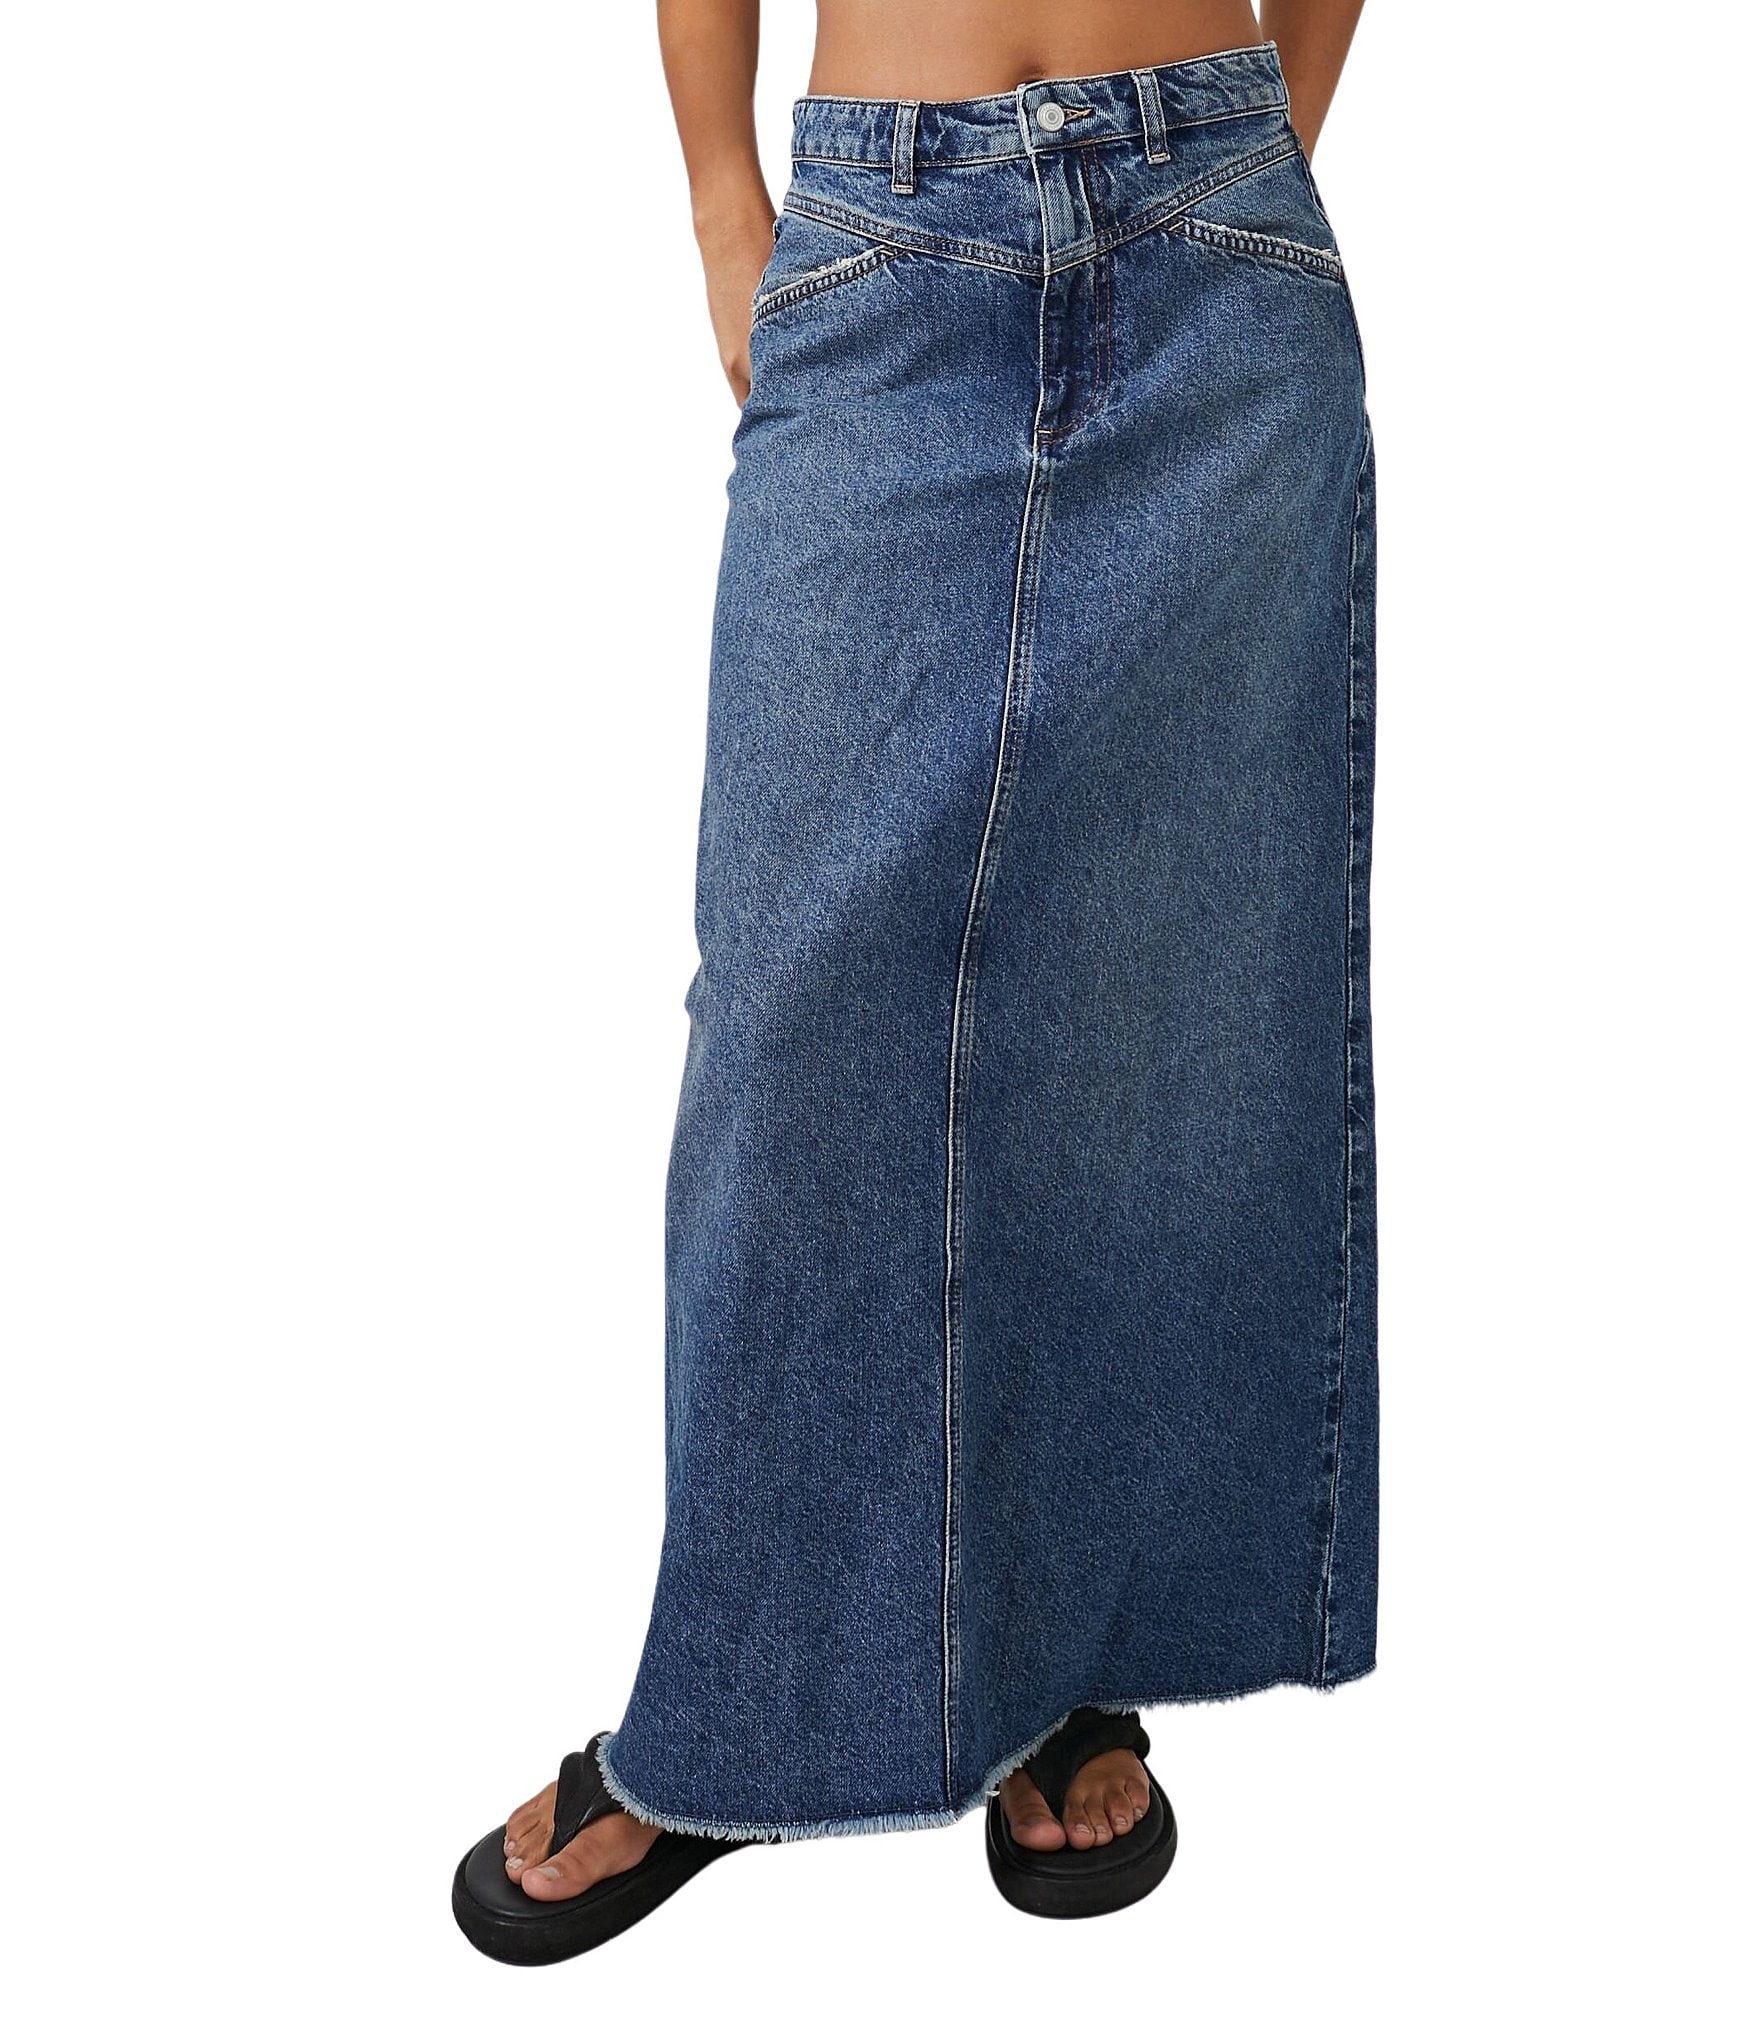 Free People Come As You Are High Rise Denim Maxi Skirt | Dillard's